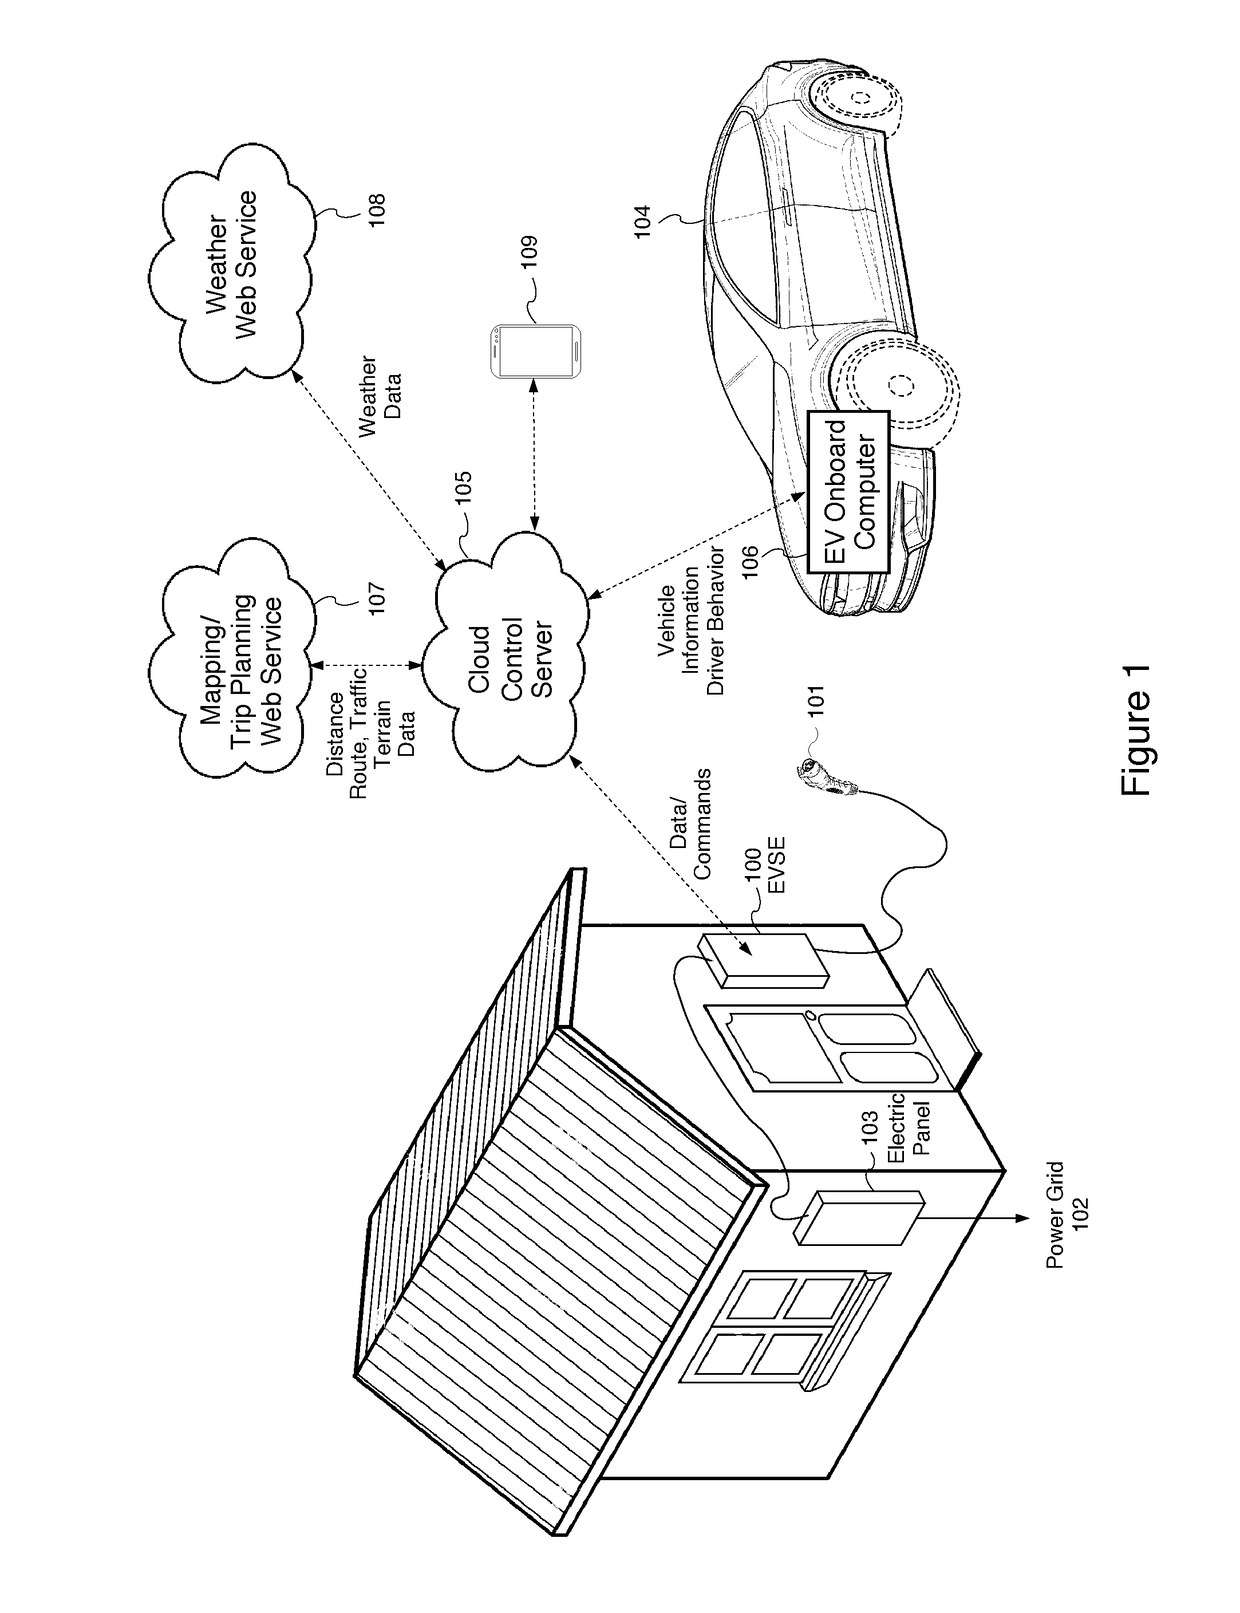 Systems and methods for electric vehicle charging with automated trip planning integration